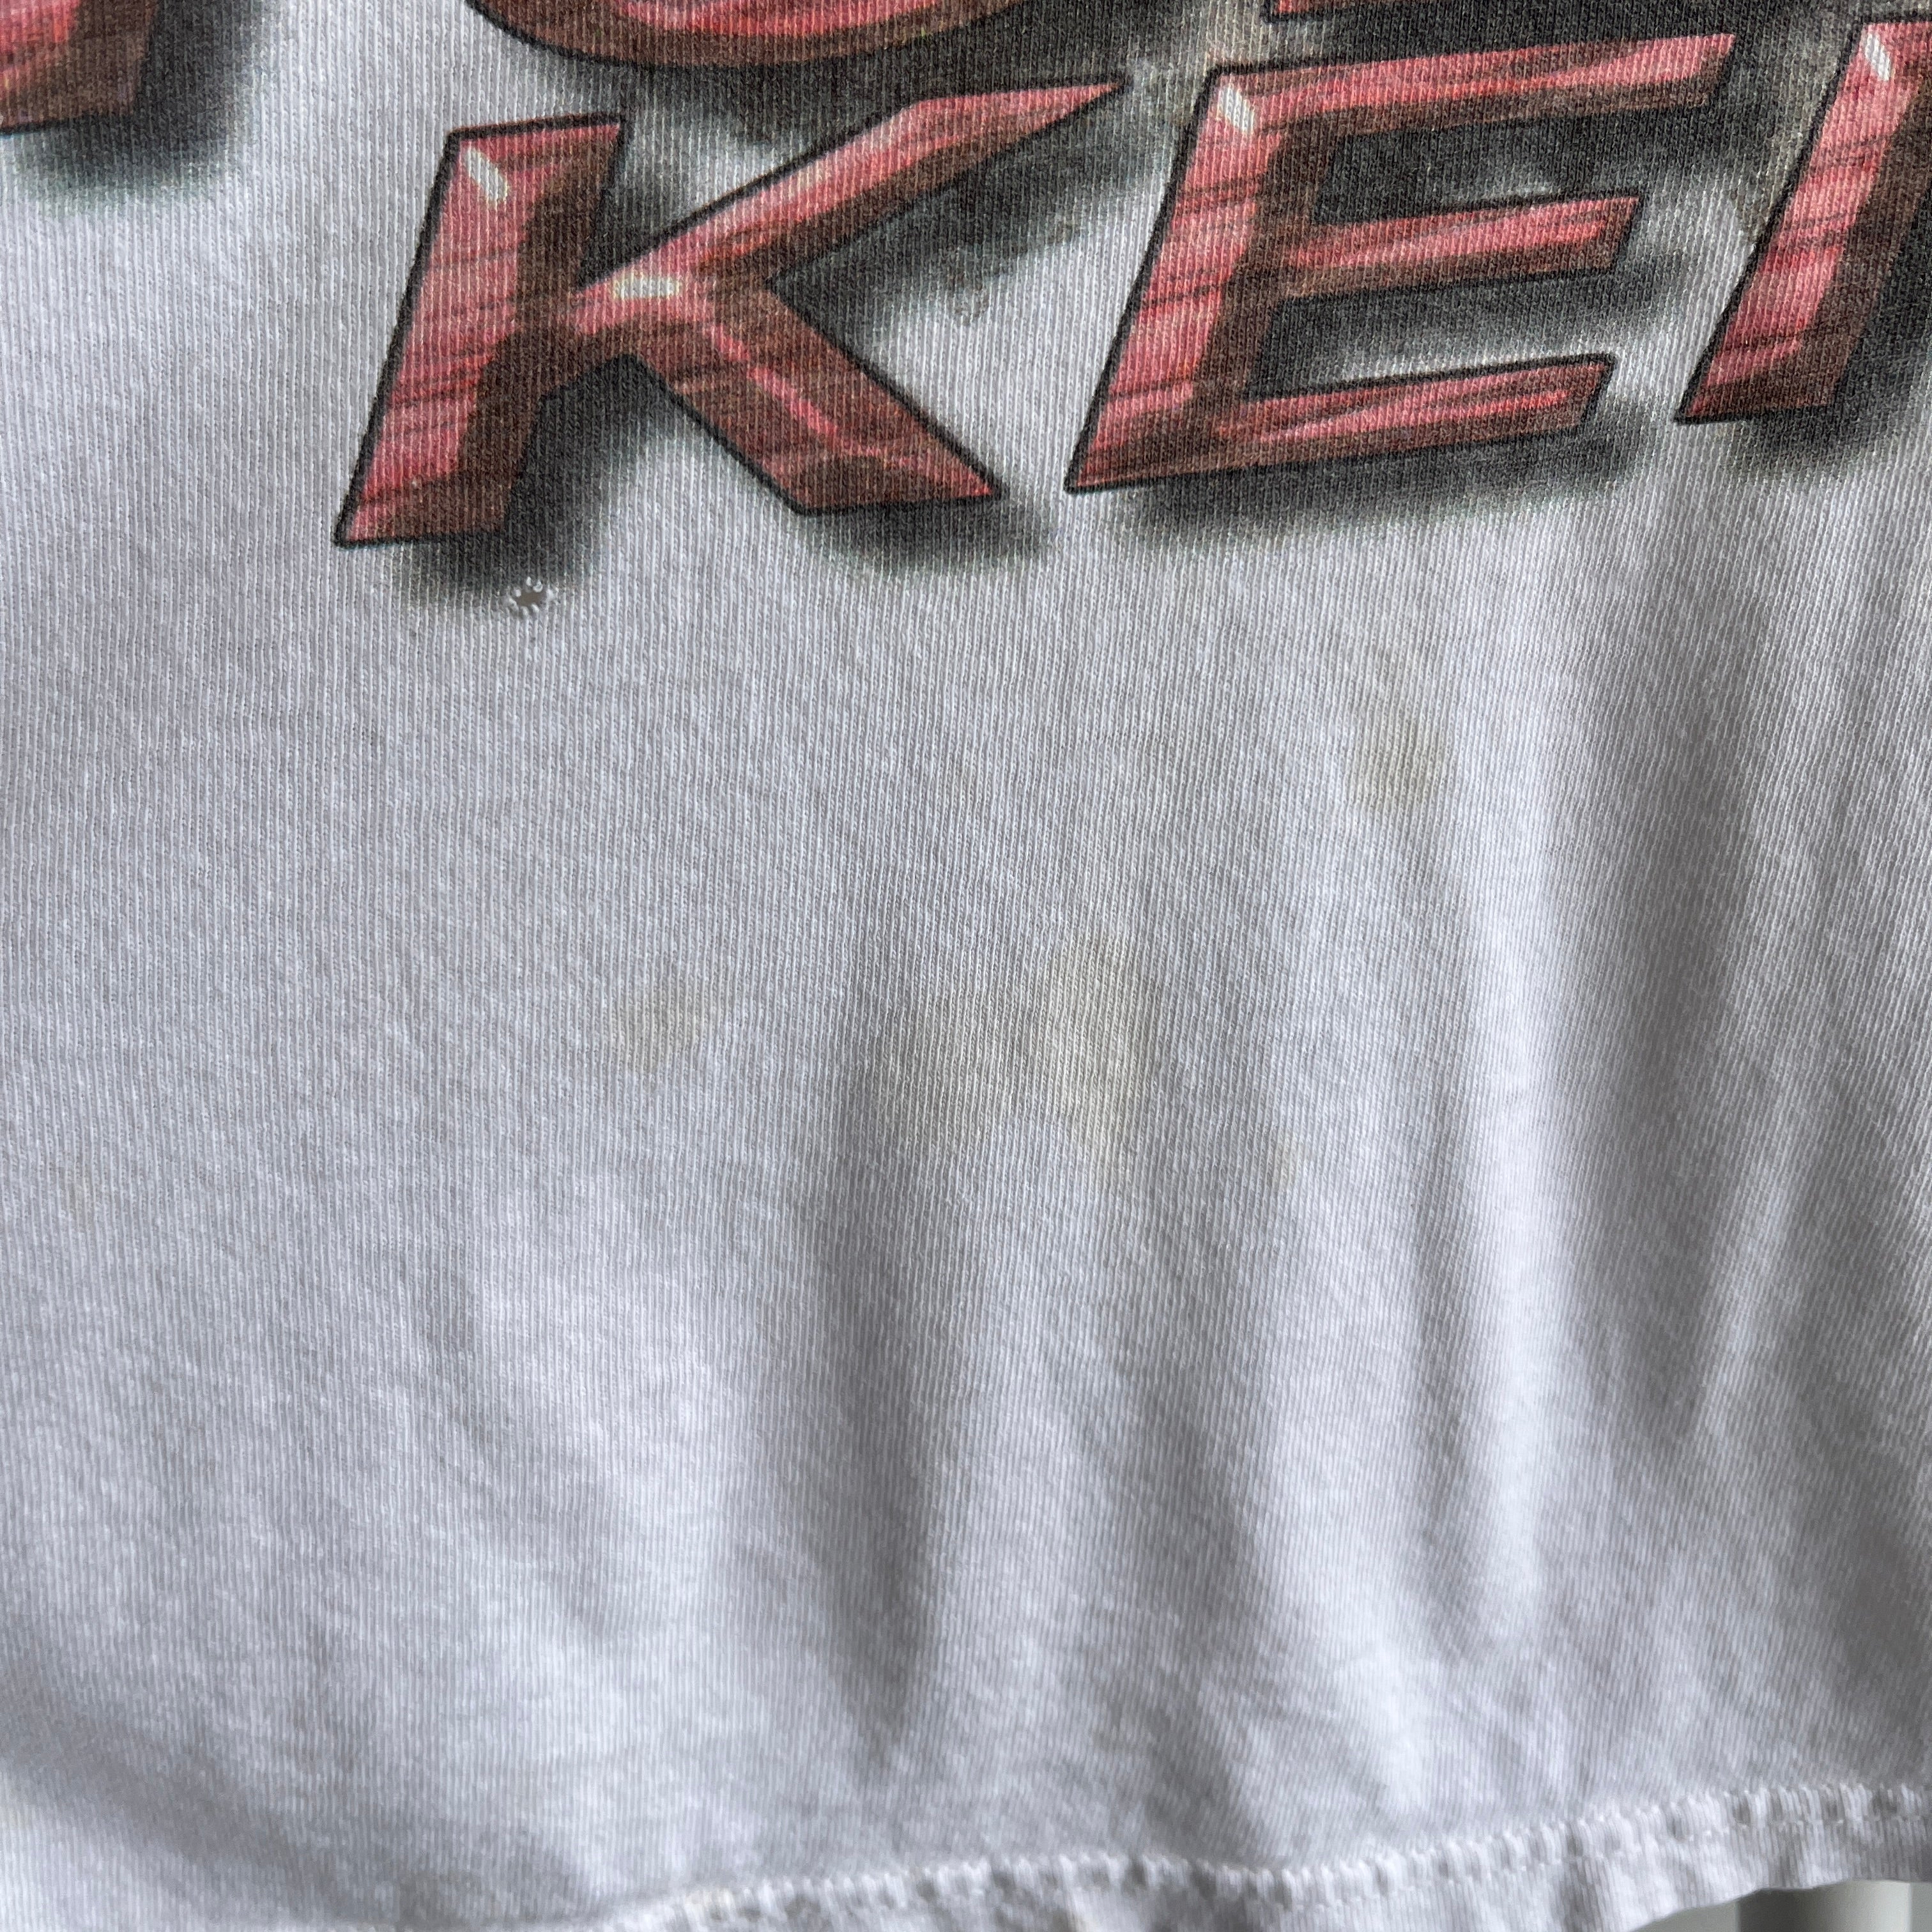 2003 Toby Keith Front and Back Thinned Out and Beat Up T-Shirt